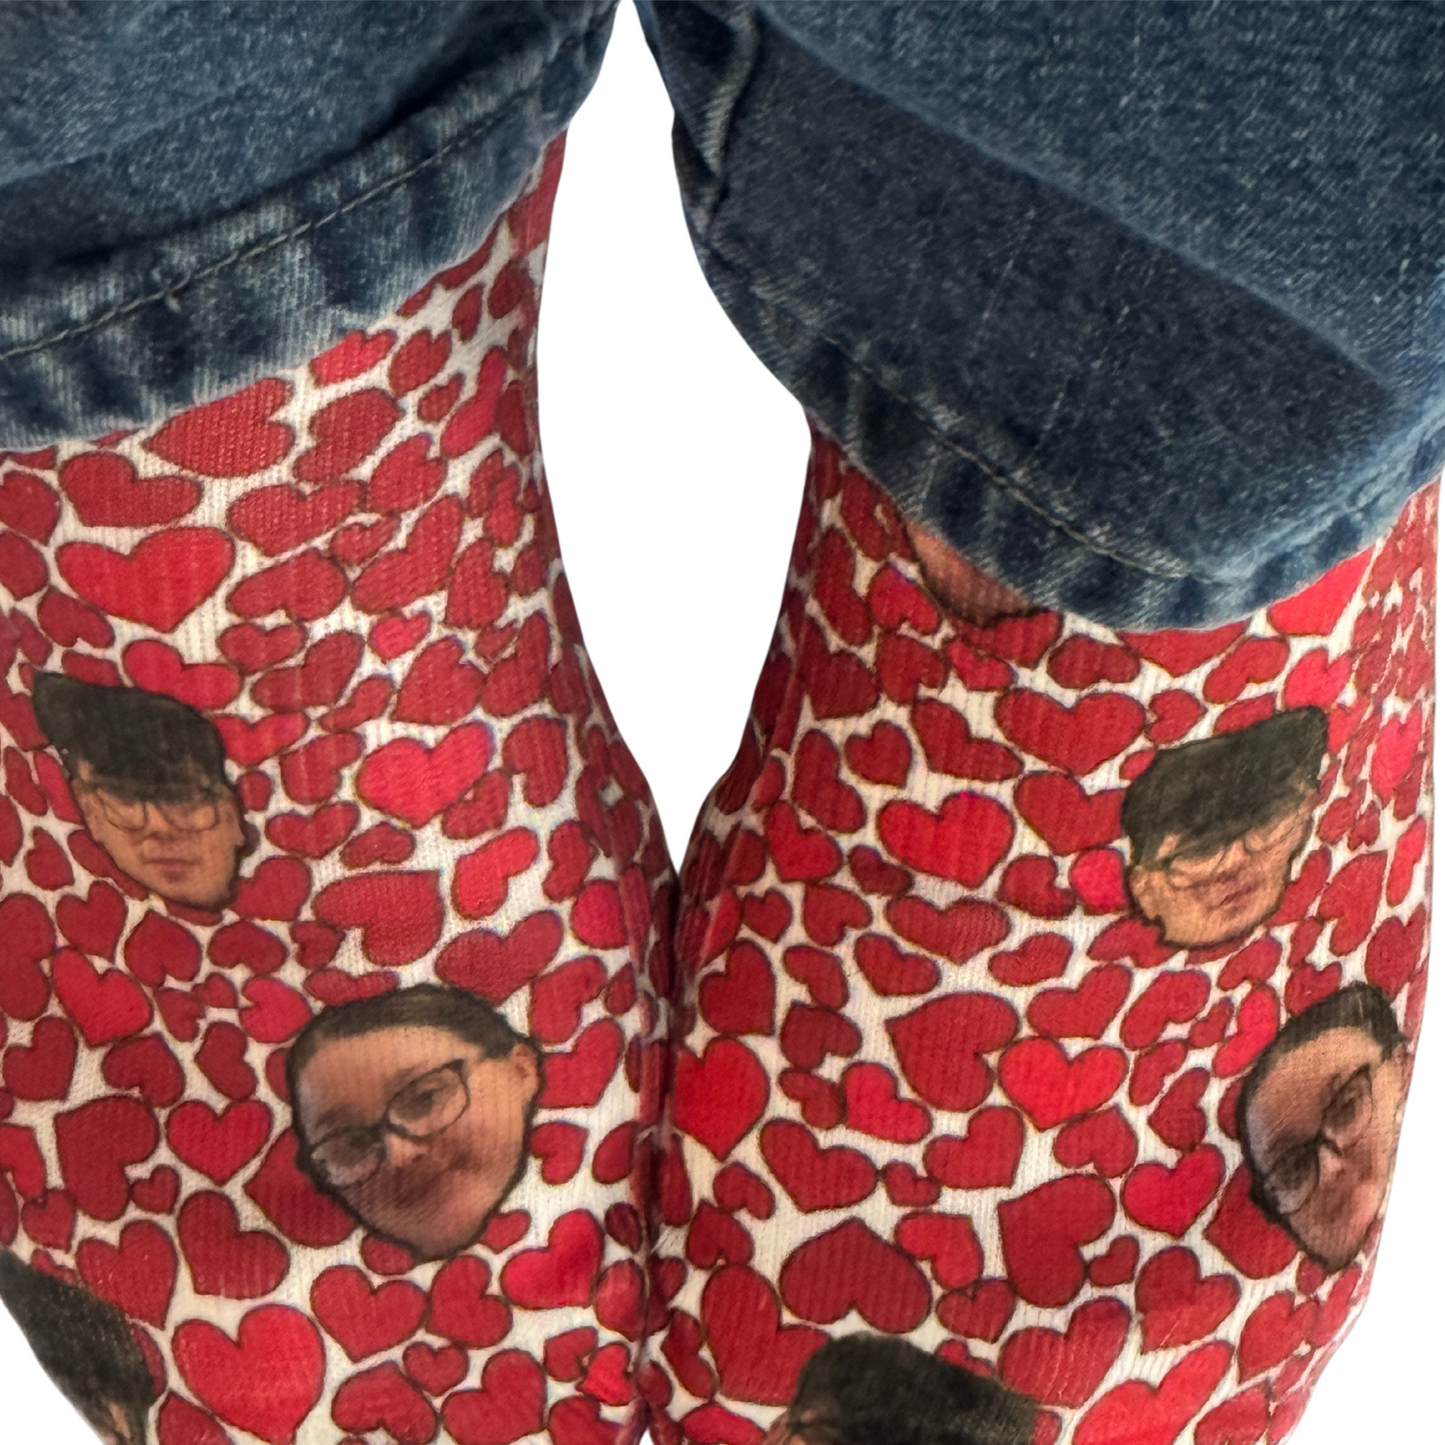 Face Socks For Valentine's Day With Hearts, Personalized Gift For Husband, Wife, Boyfriend or Girlfriend